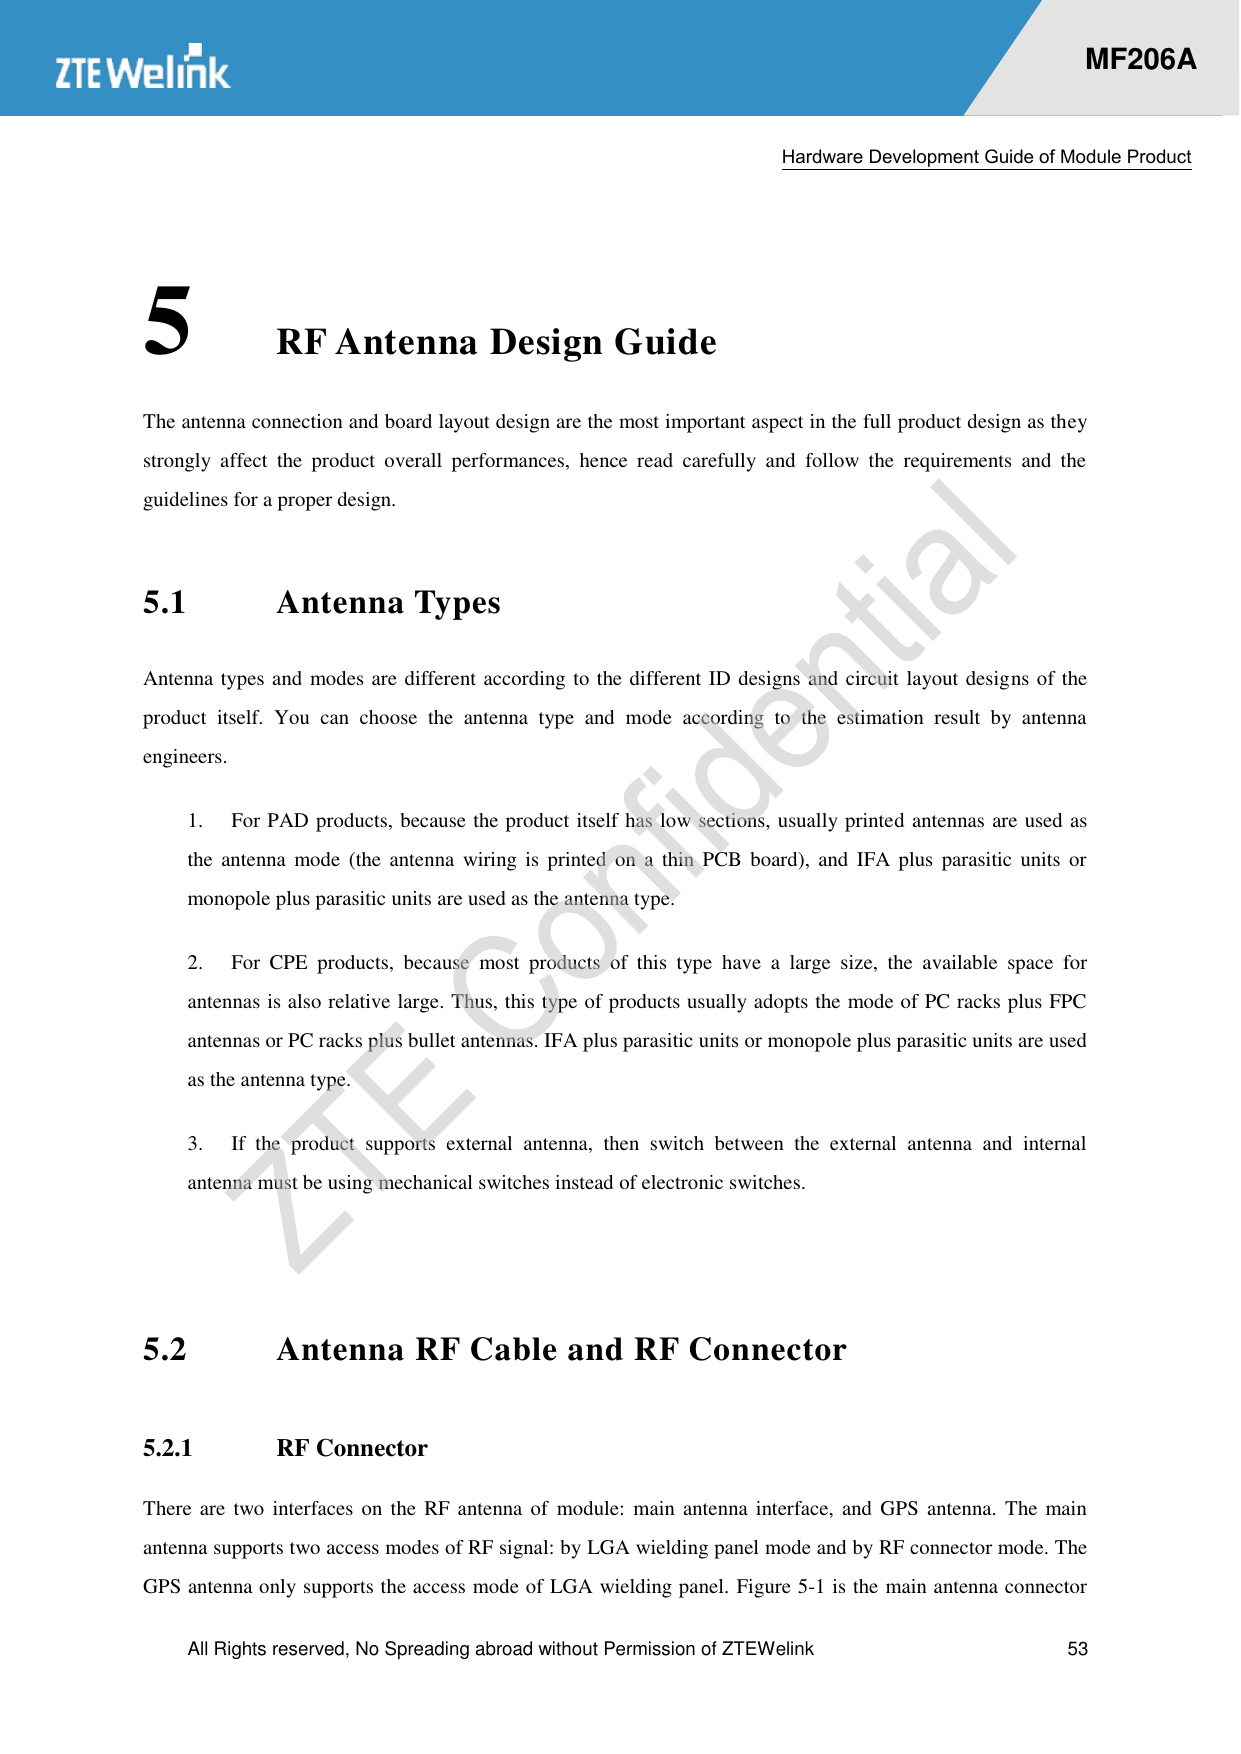  Hardware Development Guide of Module Product  All Rights reserved, No Spreading abroad without Permission of ZTEWelink  53    MF206A 5 RF Antenna Design Guide The antenna connection and board layout design are the most important aspect in the full product design as they strongly  affect  the  product  overall  performances,  hence  read  carefully  and  follow  the  requirements  and  the guidelines for a proper design. 5.1 Antenna Types Antenna types and modes are different according to the different ID designs and circuit layout designs of the product  itself.  You  can  choose  the  antenna  type  and  mode  according  to  the  estimation  result  by  antenna engineers.   1.  For PAD products, because the product itself has low sections, usually printed antennas are used as the  antenna  mode  (the  antenna  wiring  is  printed  on  a  thin PCB  board),  and  IFA  plus  parasitic  units  or monopole plus parasitic units are used as the antenna type.   2.  For  CPE  products,  because  most  products  of  this  type  have  a  large  size,  the  available  space  for antennas is also relative large. Thus, this type of products usually adopts the mode of PC racks plus FPC antennas or PC racks plus bullet antennas. IFA plus parasitic units or monopole plus parasitic units are used as the antenna type. 3.  If  the  product  supports  external  antenna,  then  switch  between  the  external  antenna  and  internal antenna must be using mechanical switches instead of electronic switches.  5.2 Antenna RF Cable and RF Connector 5.2.1 RF Connector There  are  two interfaces  on the RF  antenna of  module:  main antenna interface,  and GPS  antenna. The  main antenna supports two access modes of RF signal: by LGA wielding panel mode and by RF connector mode. The GPS antenna only supports the access mode of LGA wielding panel. Figure 5-1 is the main antenna connector 